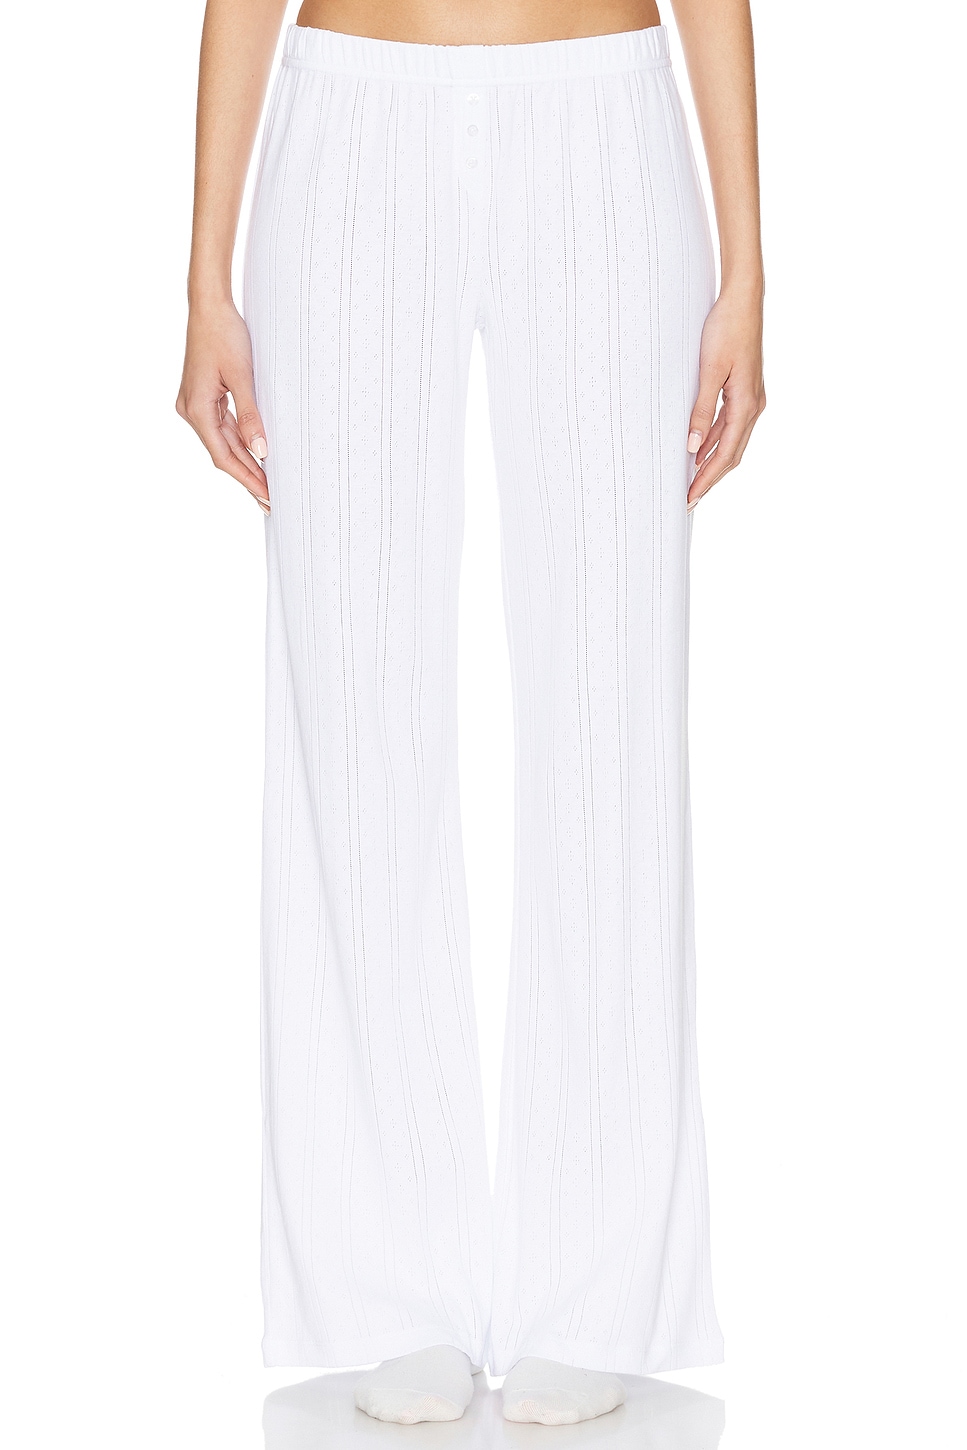 Image 1 of Cou Cou Intimates The Pant in White Pointelle